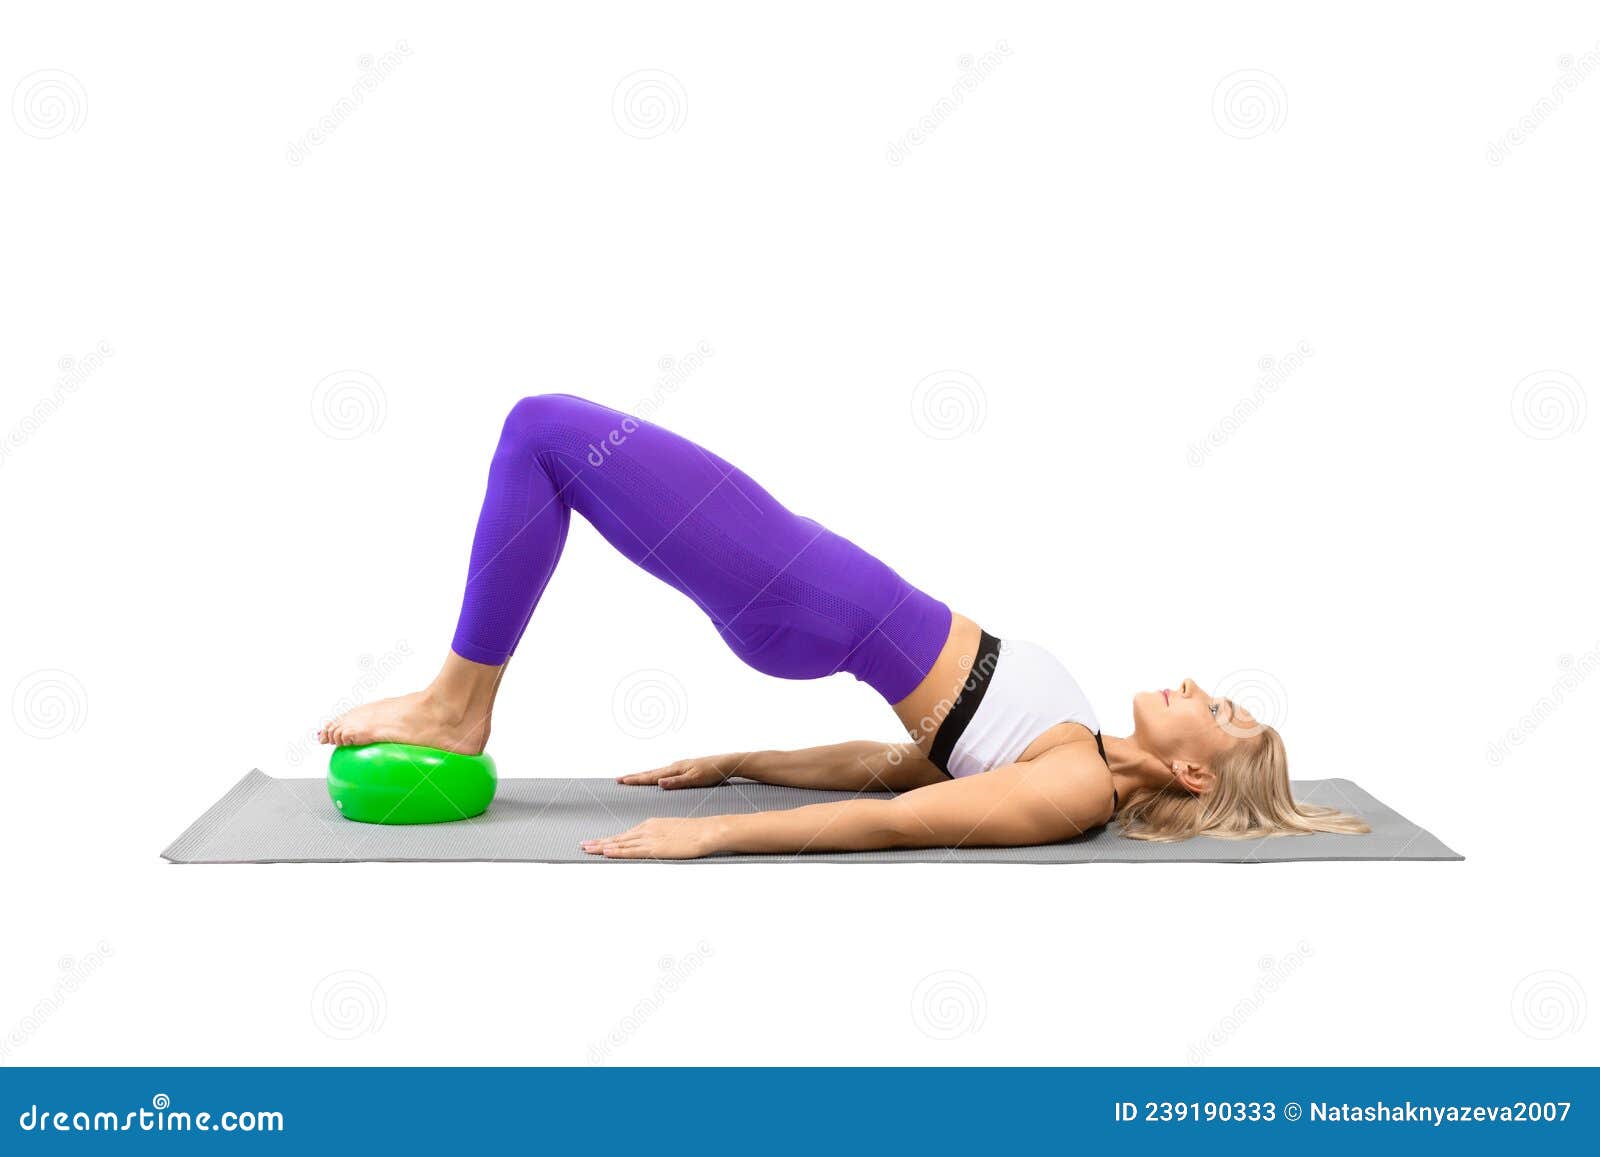 Classic Pilates with Props. Athletic Woman Practice Shoulder